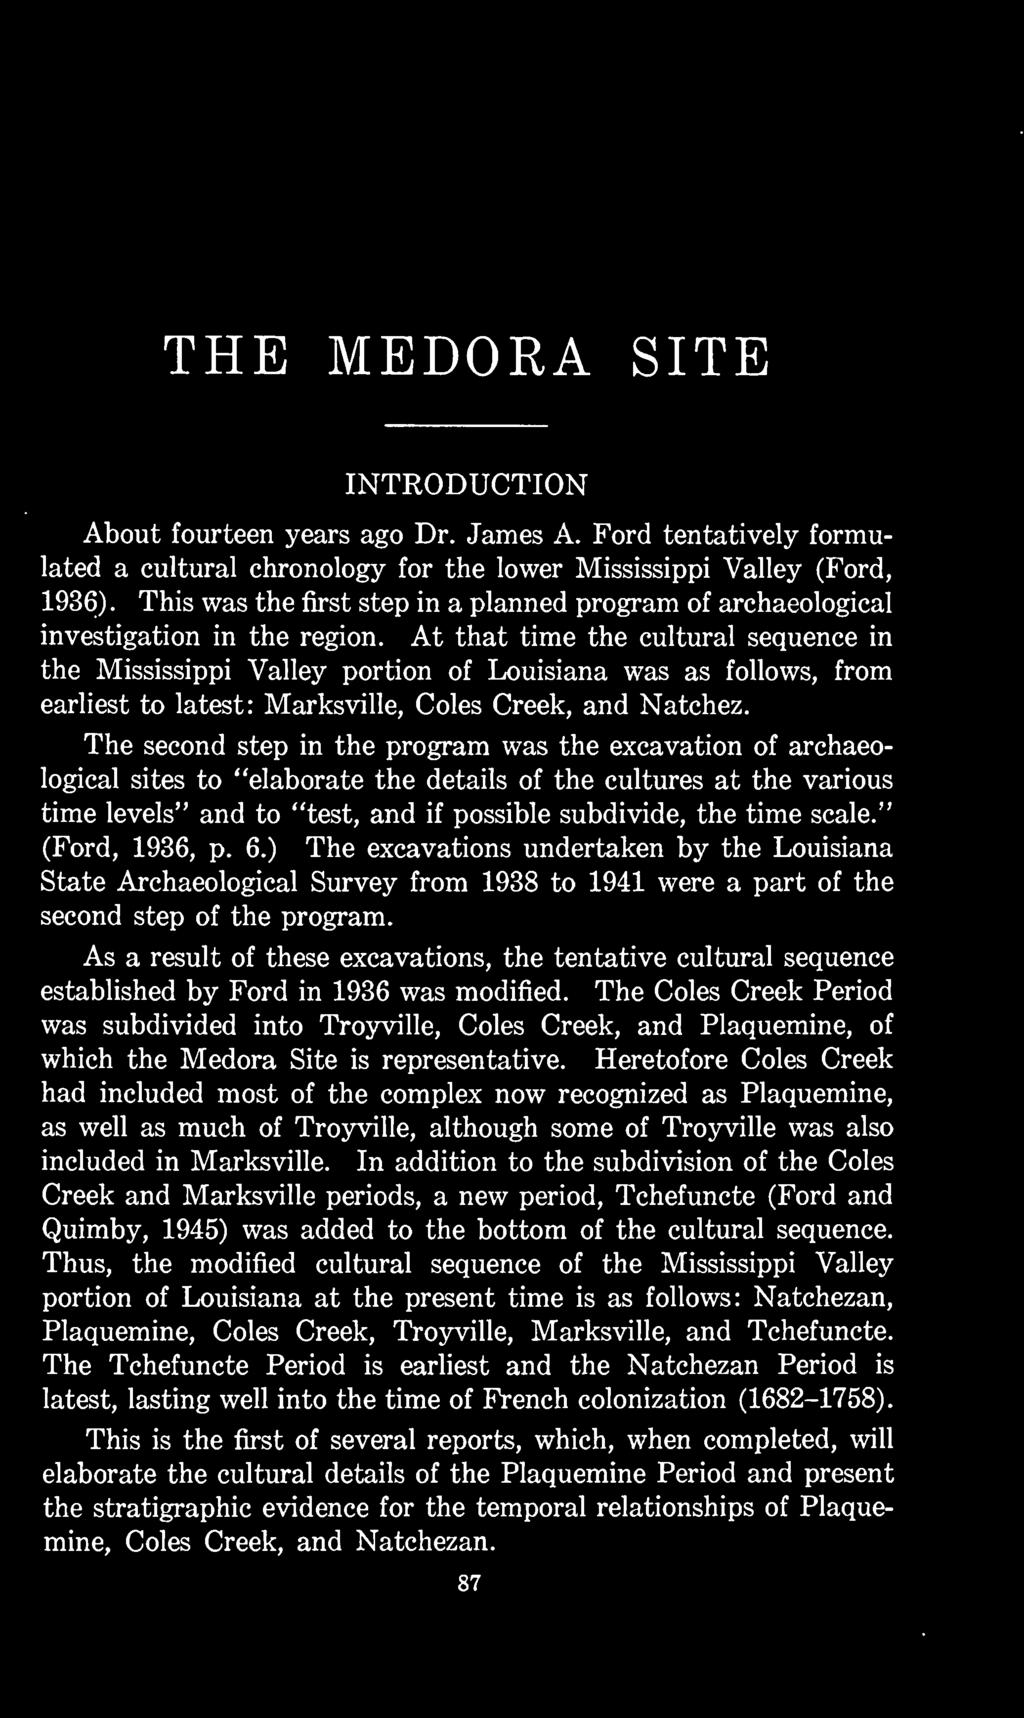 " (Ford, 1936, p. 6.) The excavations undertaken by the Louisiana State Archaeological Survey from 1938 to 1941 were a part of the second step of the program.